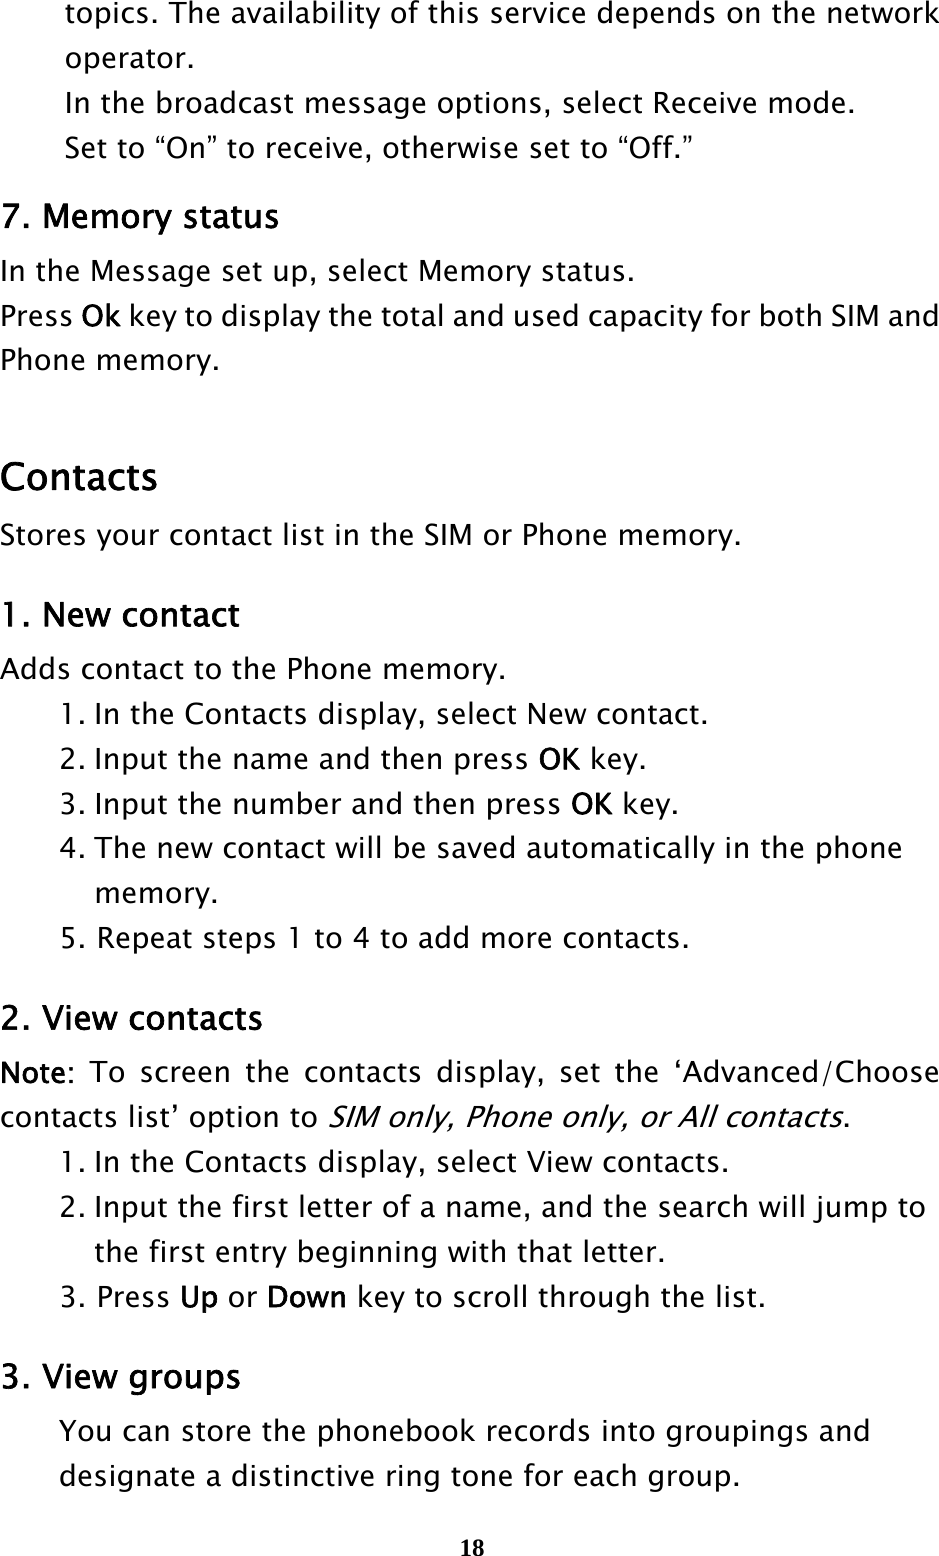  18  topics. The availability of this service depends on the network    operator.    In the broadcast message options, select Receive mode.   Set to “On” to receive, otherwise set to “Off.” 7. Memory status In the Message set up, select Memory status. Press Ok key to display the total and used capacity for both SIM and Phone memory.  Contacts Stores your contact list in the SIM or Phone memory.    1. New contact Adds contact to the Phone memory.   1. In the Contacts display, select New contact.   2. Input the name and then press OK key.     3. Input the number and then press OK key.   4. The new contact will be saved automatically in the phone     memory. 5. Repeat steps 1 to 4 to add more contacts.  2. View contacts Note: To screen the contacts display, set the ‘Advanced/Choose contacts list’ option to SIM only, Phone only, or All contacts.   1. In the Contacts display, select View contacts.   2. Input the first letter of a name, and the search will jump to       the first entry beginning with that letter. 3. Press Up or Down key to scroll through the list.  3. View groups   You can store the phonebook records into groupings and     designate a distinctive ring tone for each group. 